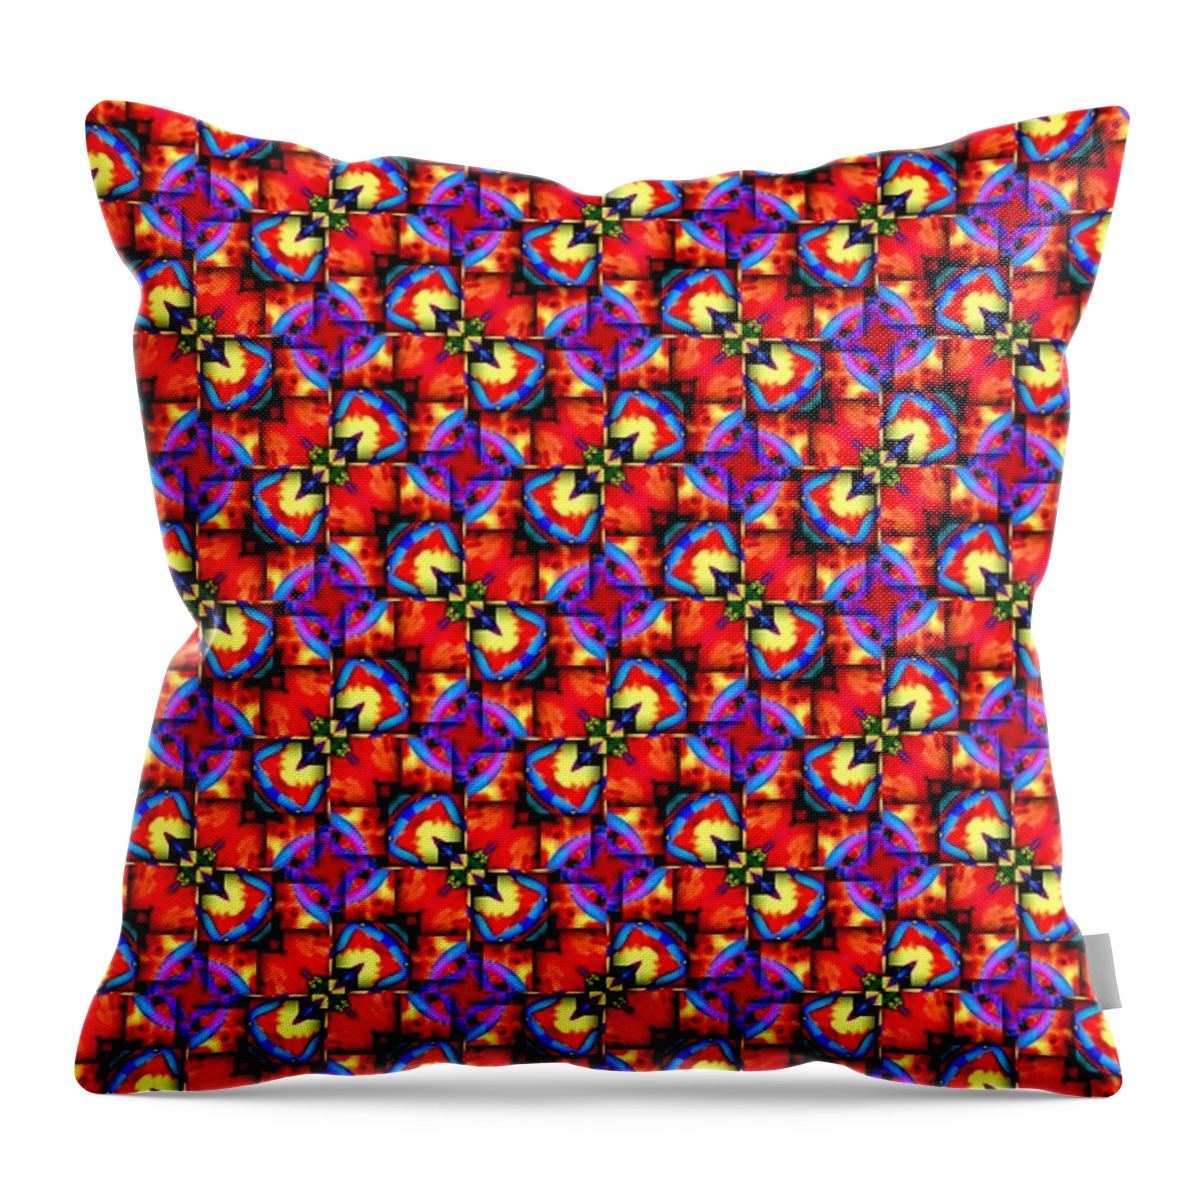 Seamless Tile Throw Pillow featuring the digital art Tile 0002 by Manny Lorenzo